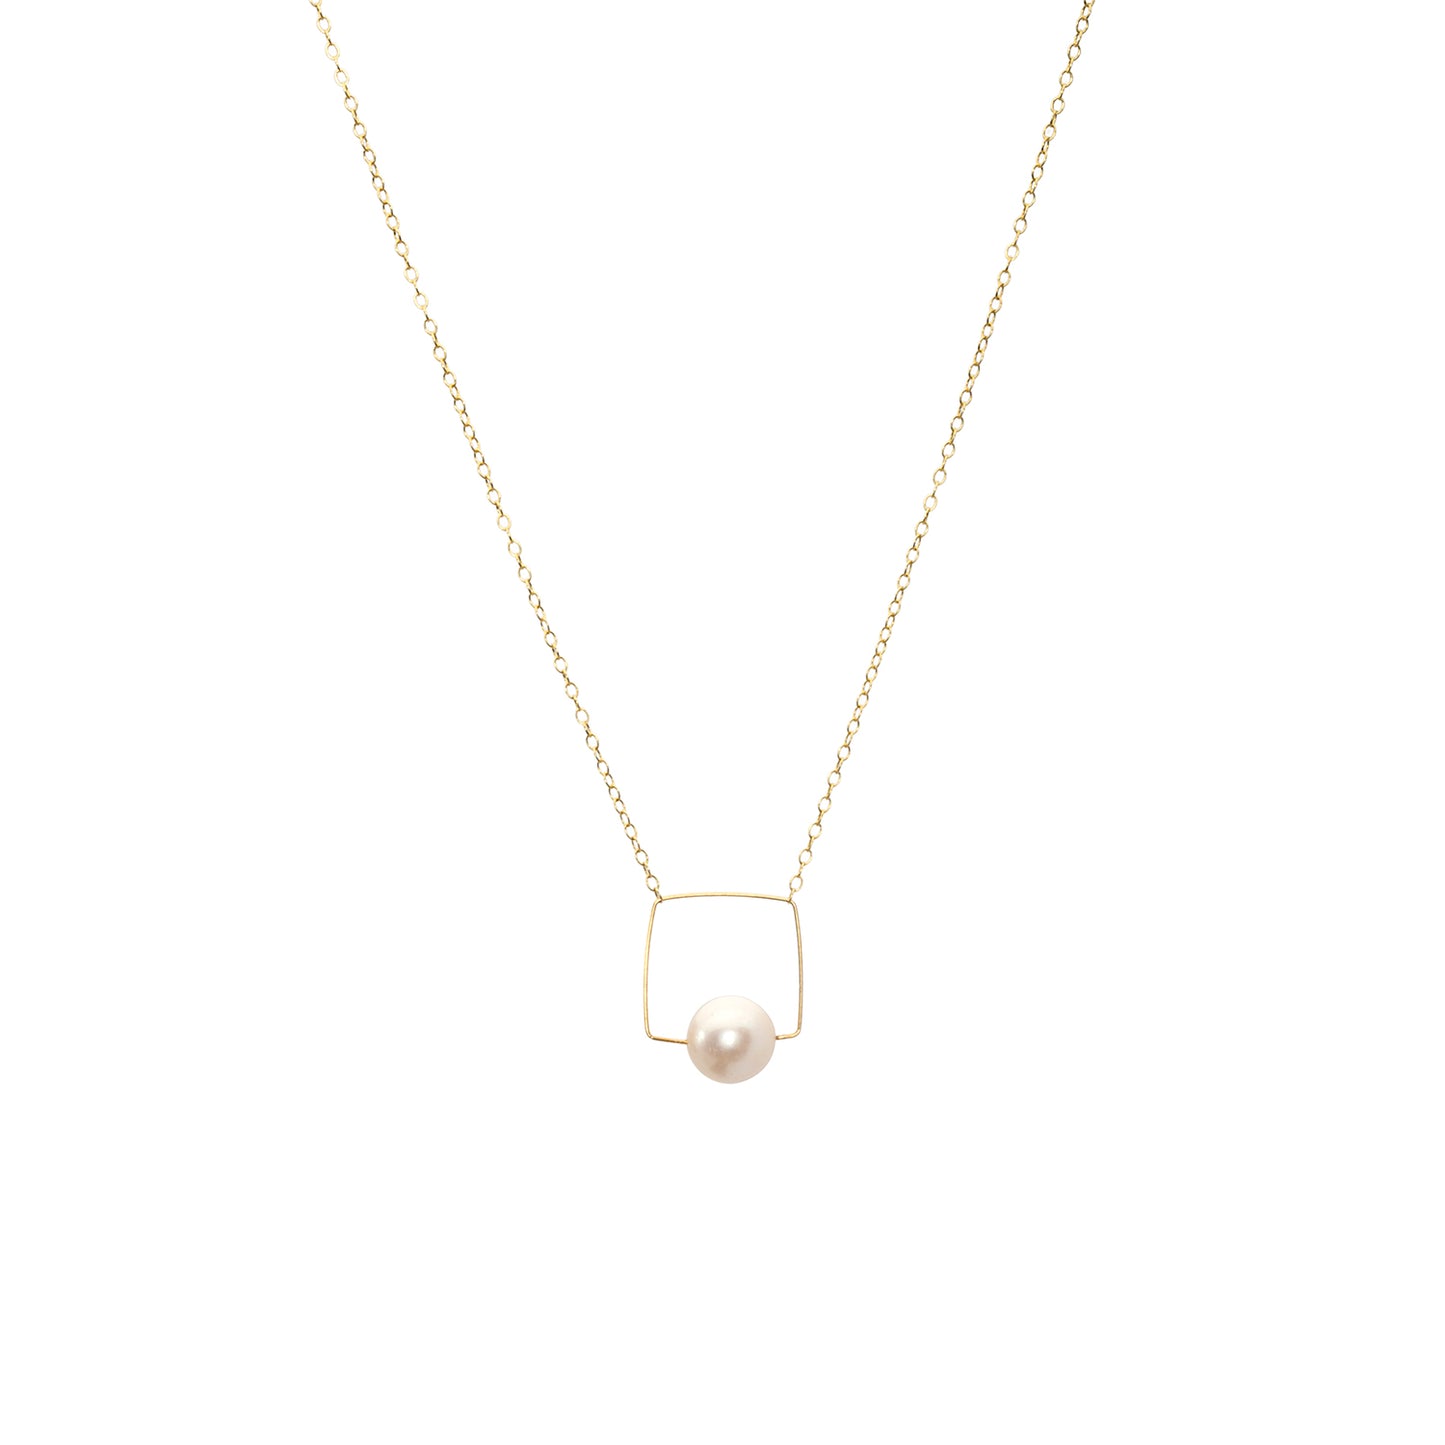 Medium Square Pendant Necklace with Round Freshwater Pearl